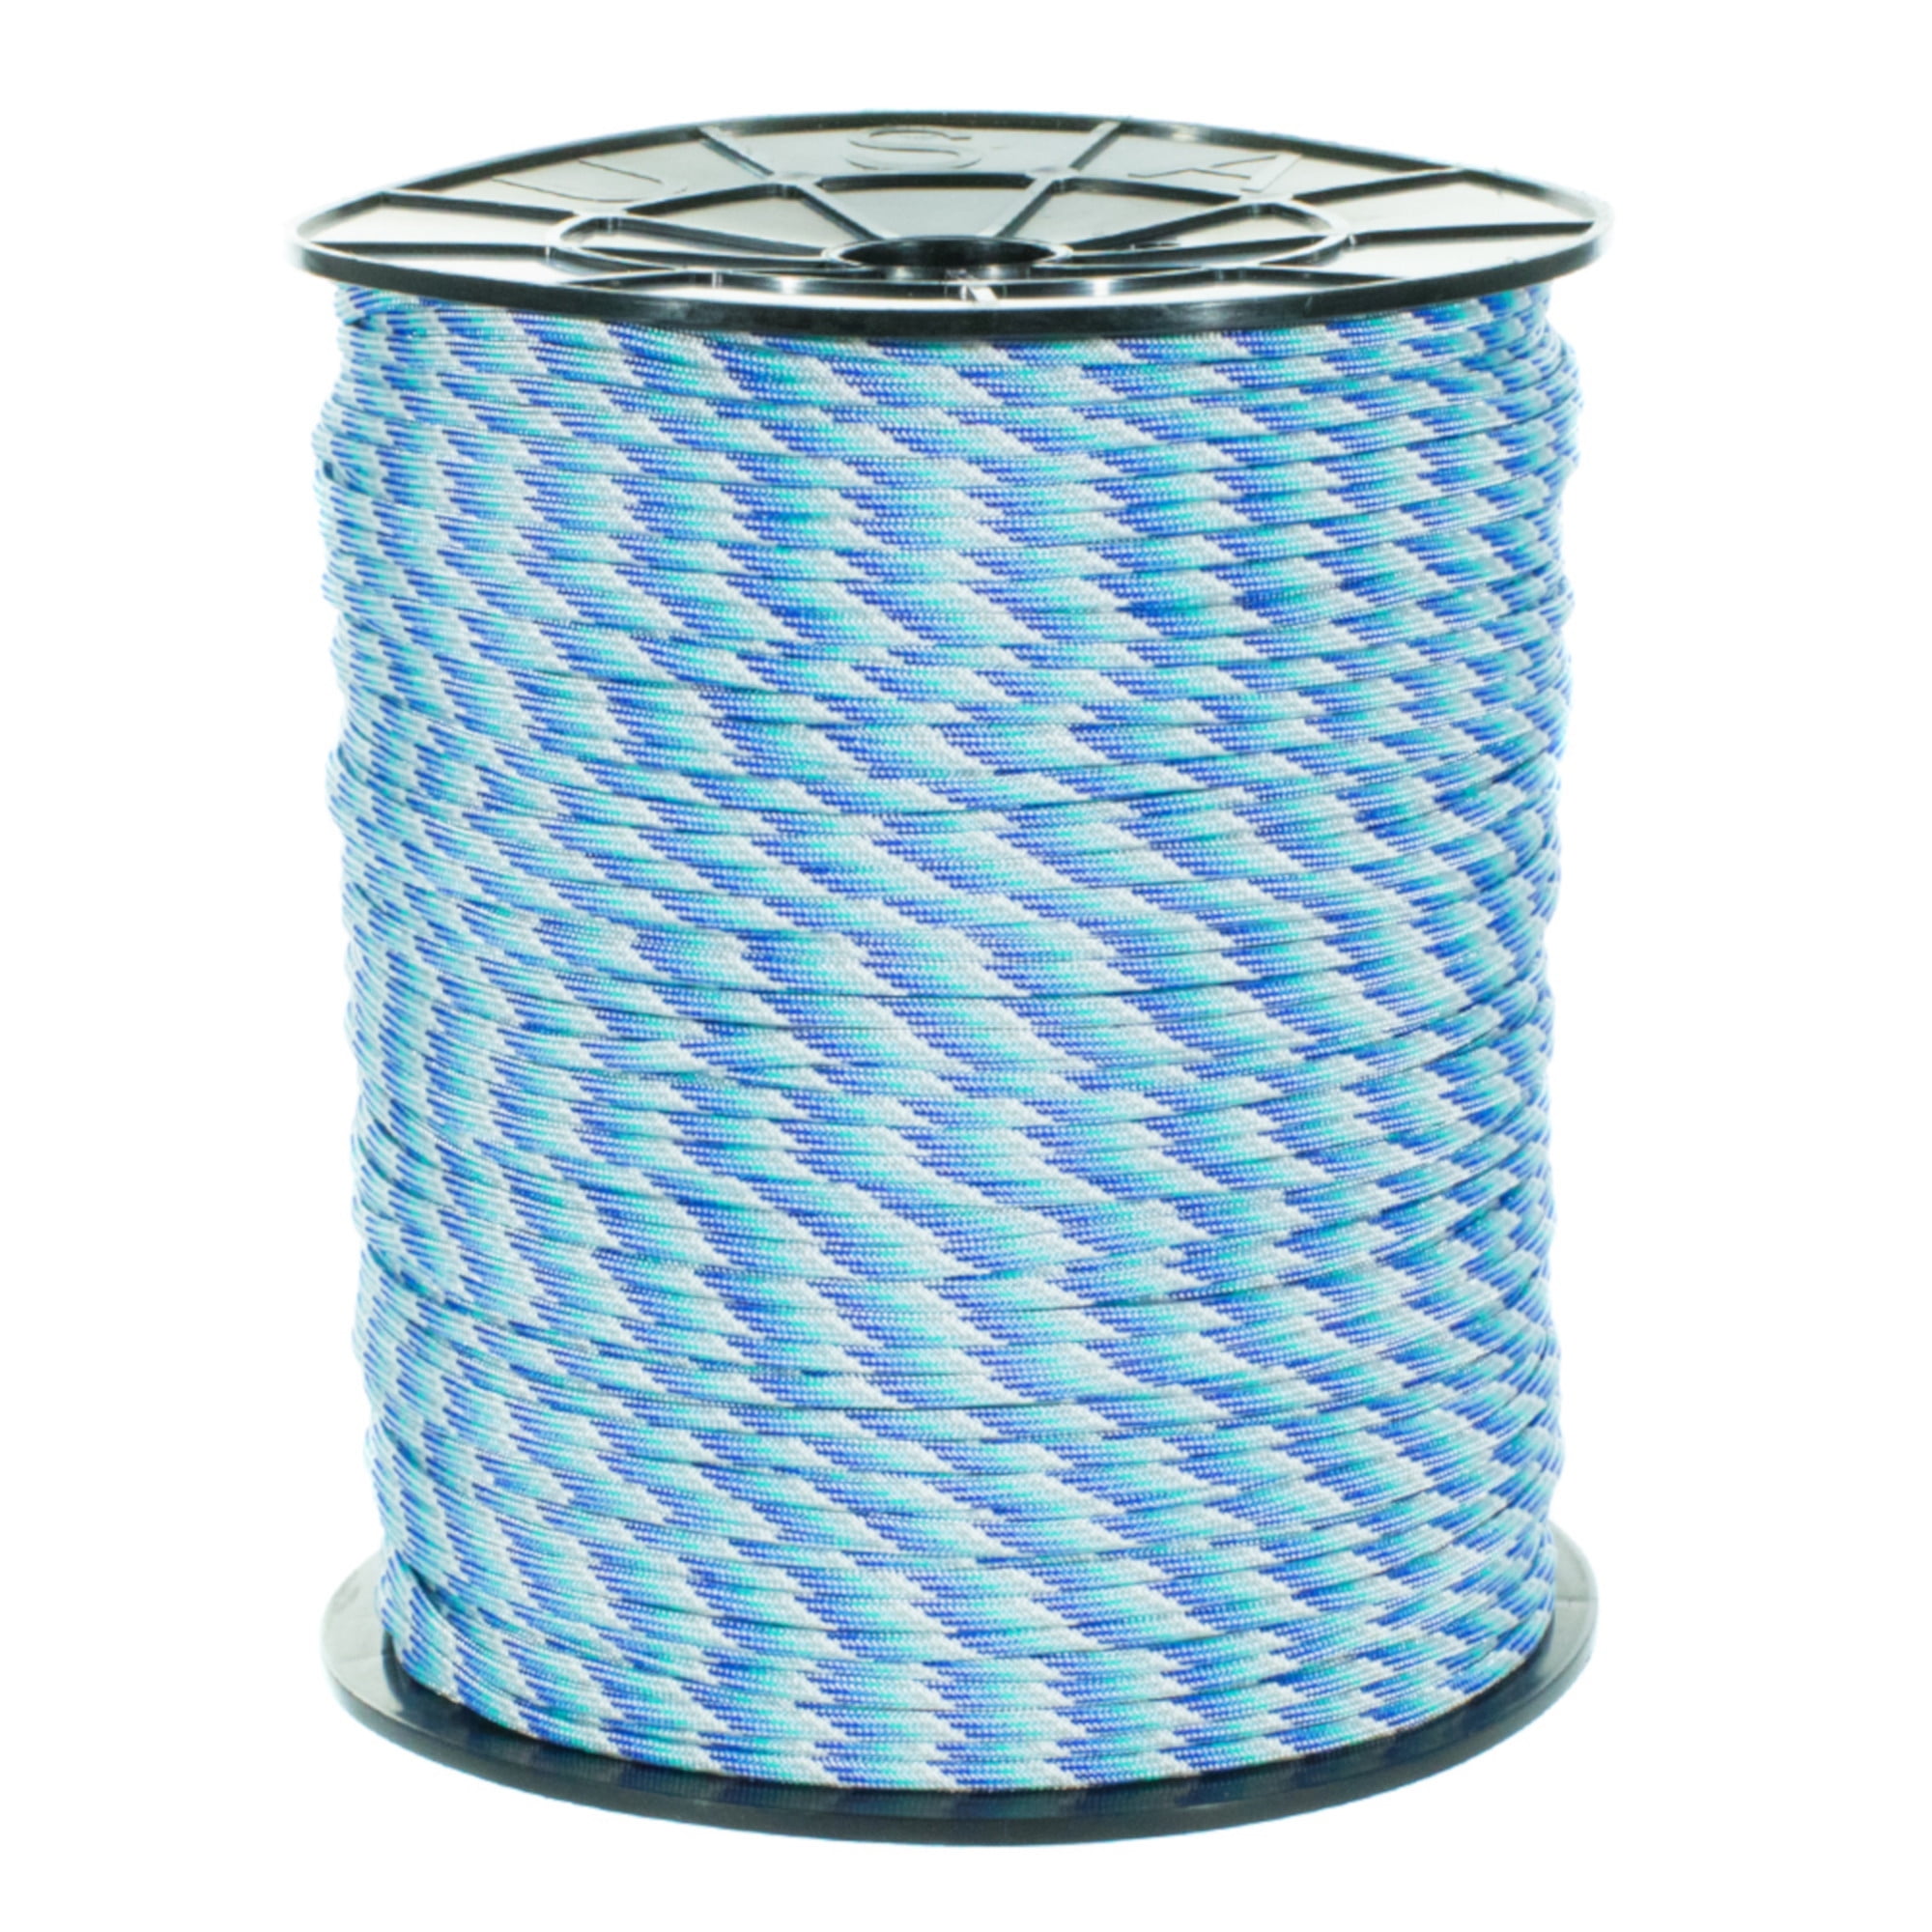 100 ft Blue & Black Chequered Paracord 550 7 Strand 4mm Cord Rope 15 50 25 